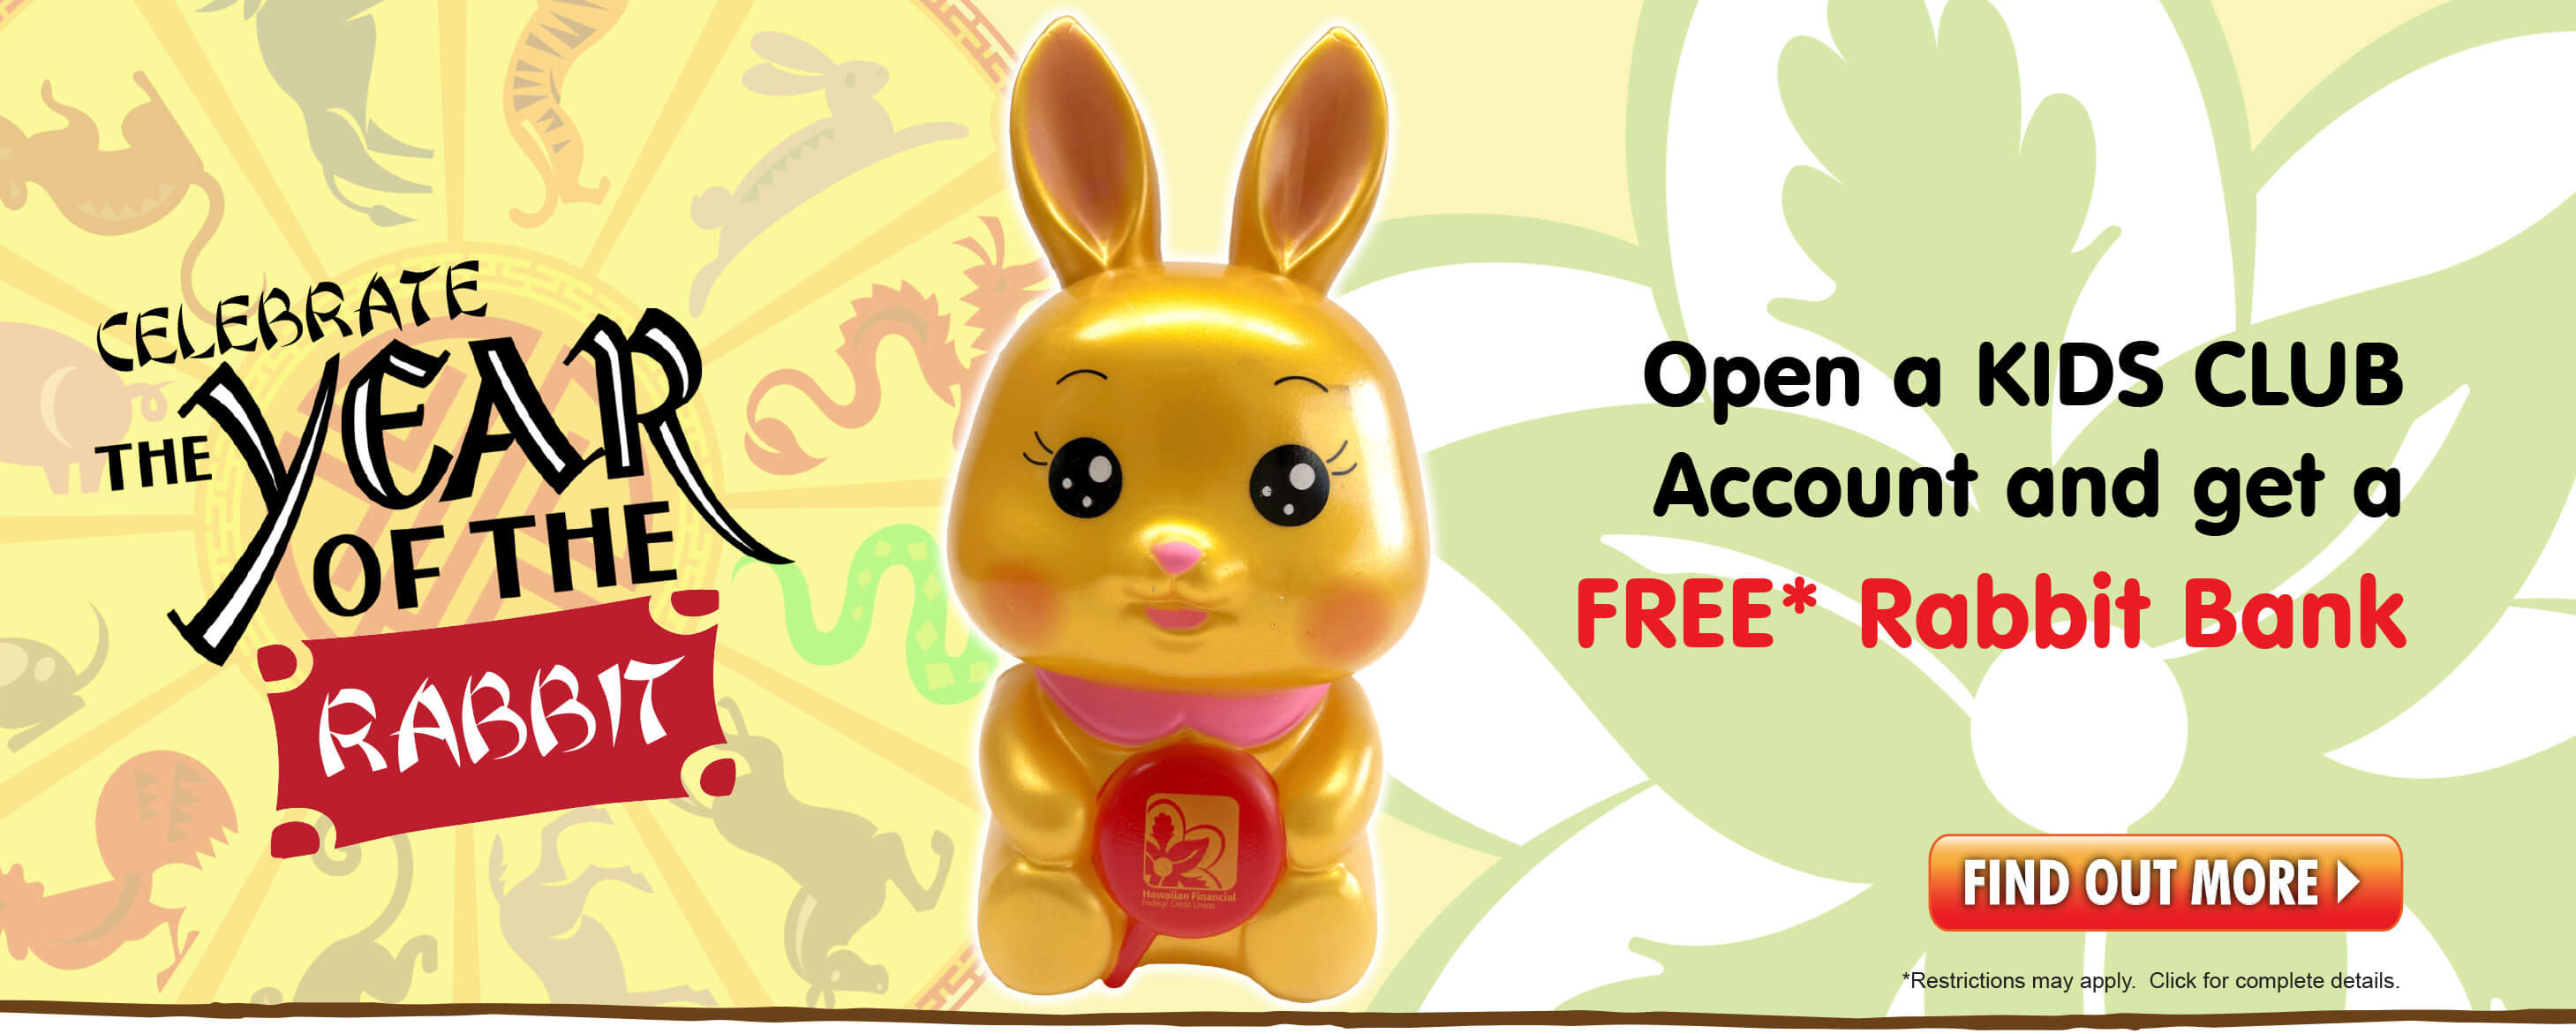 Celebrate the year of the Rabbit. Open a Kids Club Account and get a FREE* Rabbit Bank!  Restrictions may apply.  Click for complete details.